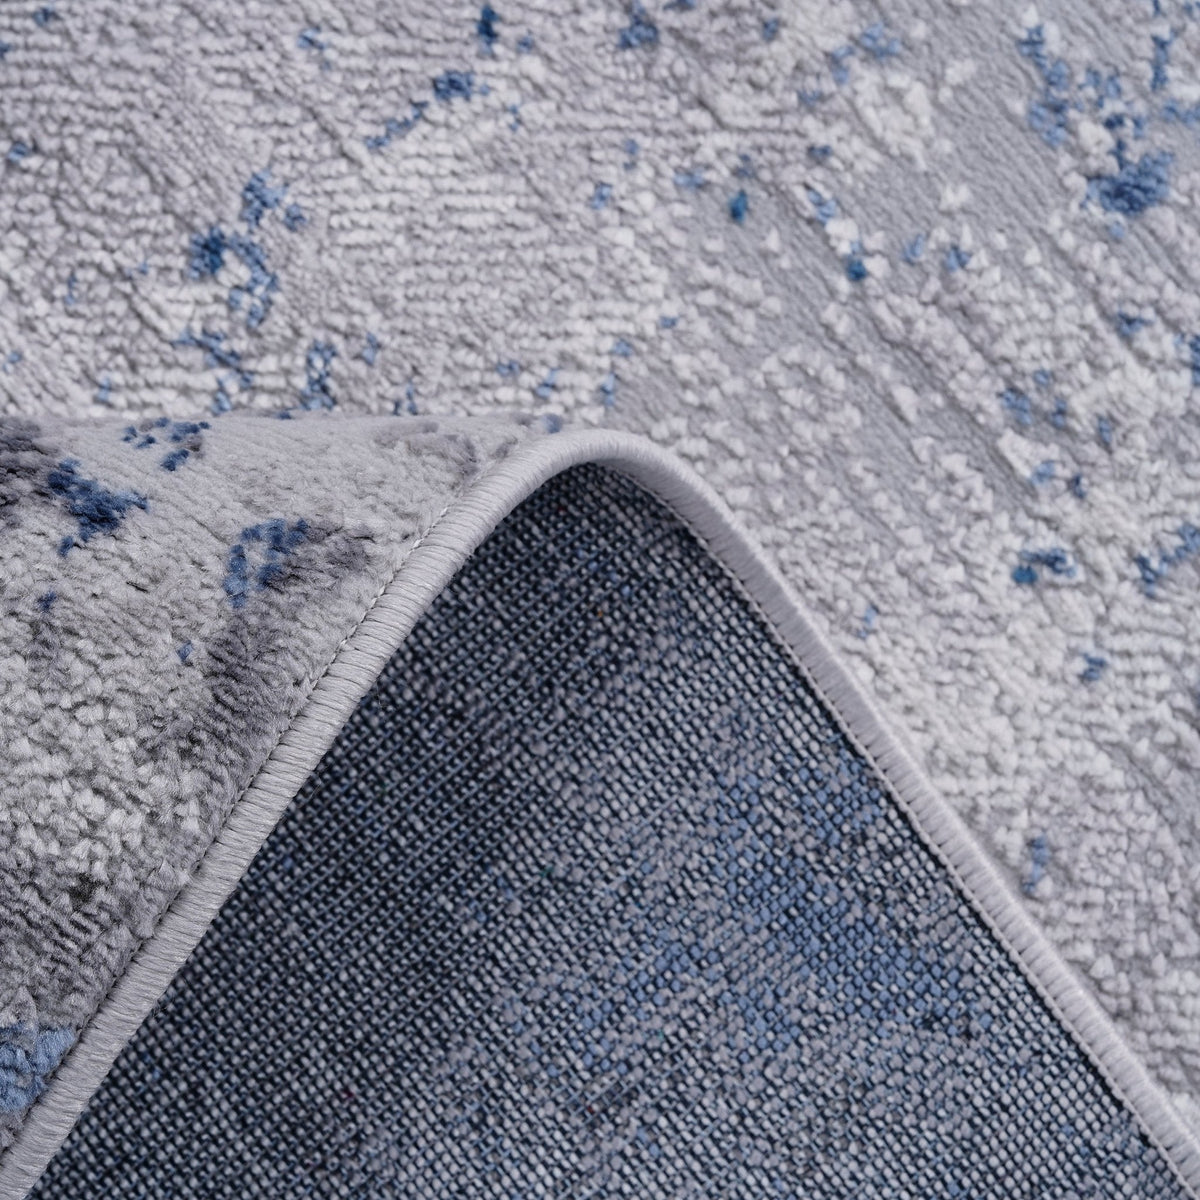 Marfi Silver-Blue Rug Size 6'7'' x 9' | Mid in Mod | Houston | Best Furniture stores in Houston